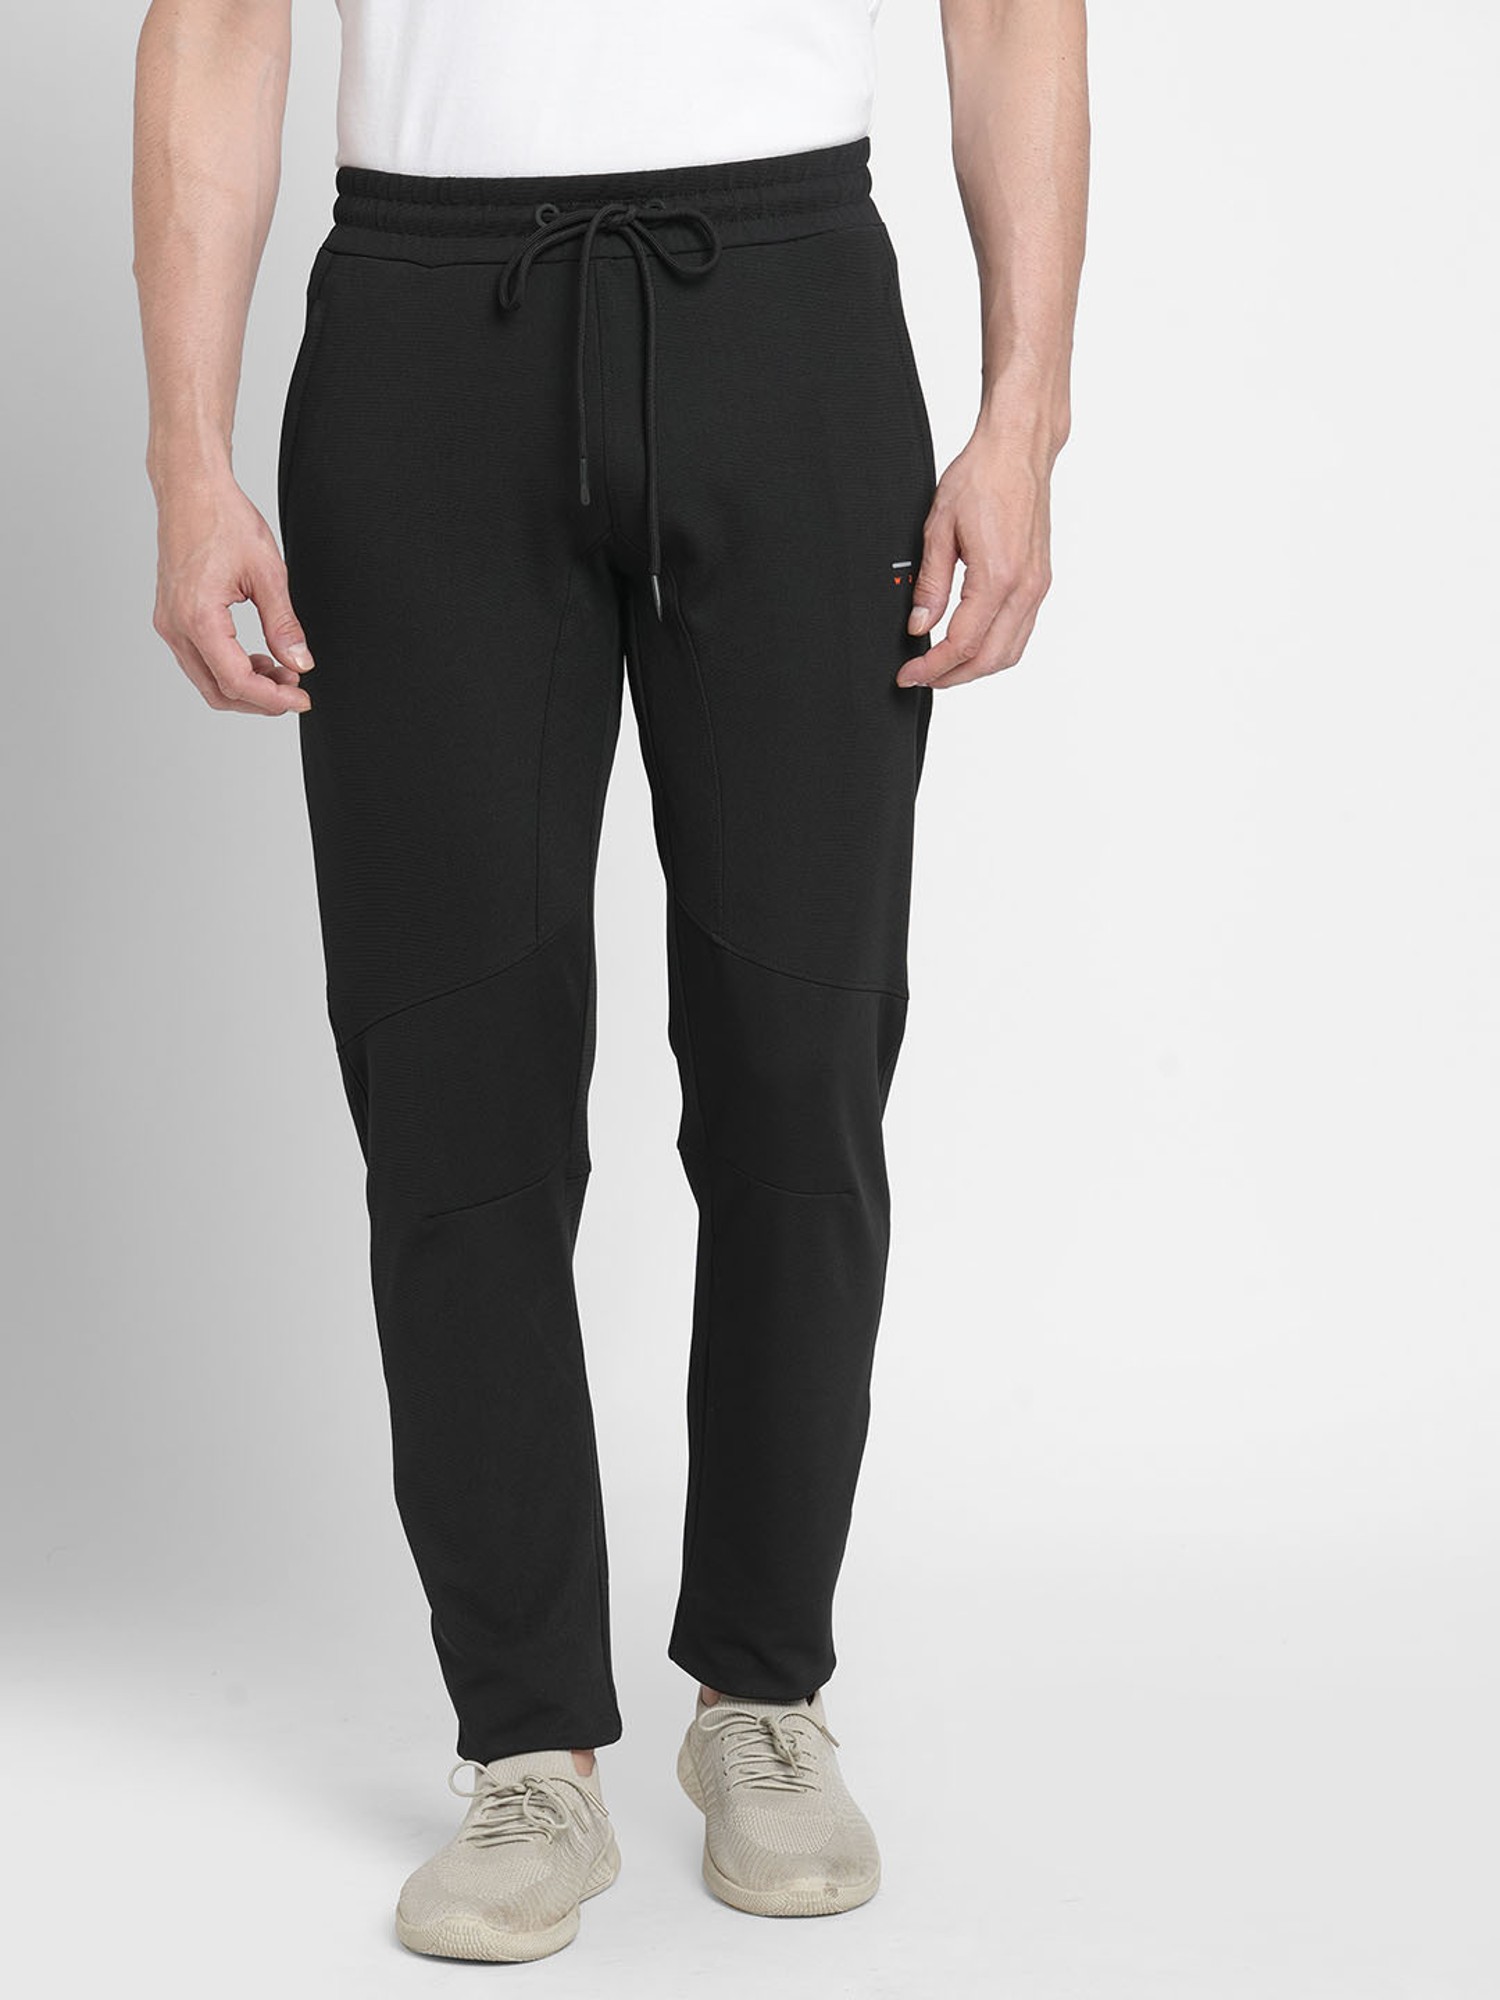 Trackpants For Men  Online shopping stores Comfort wear Leisure wear